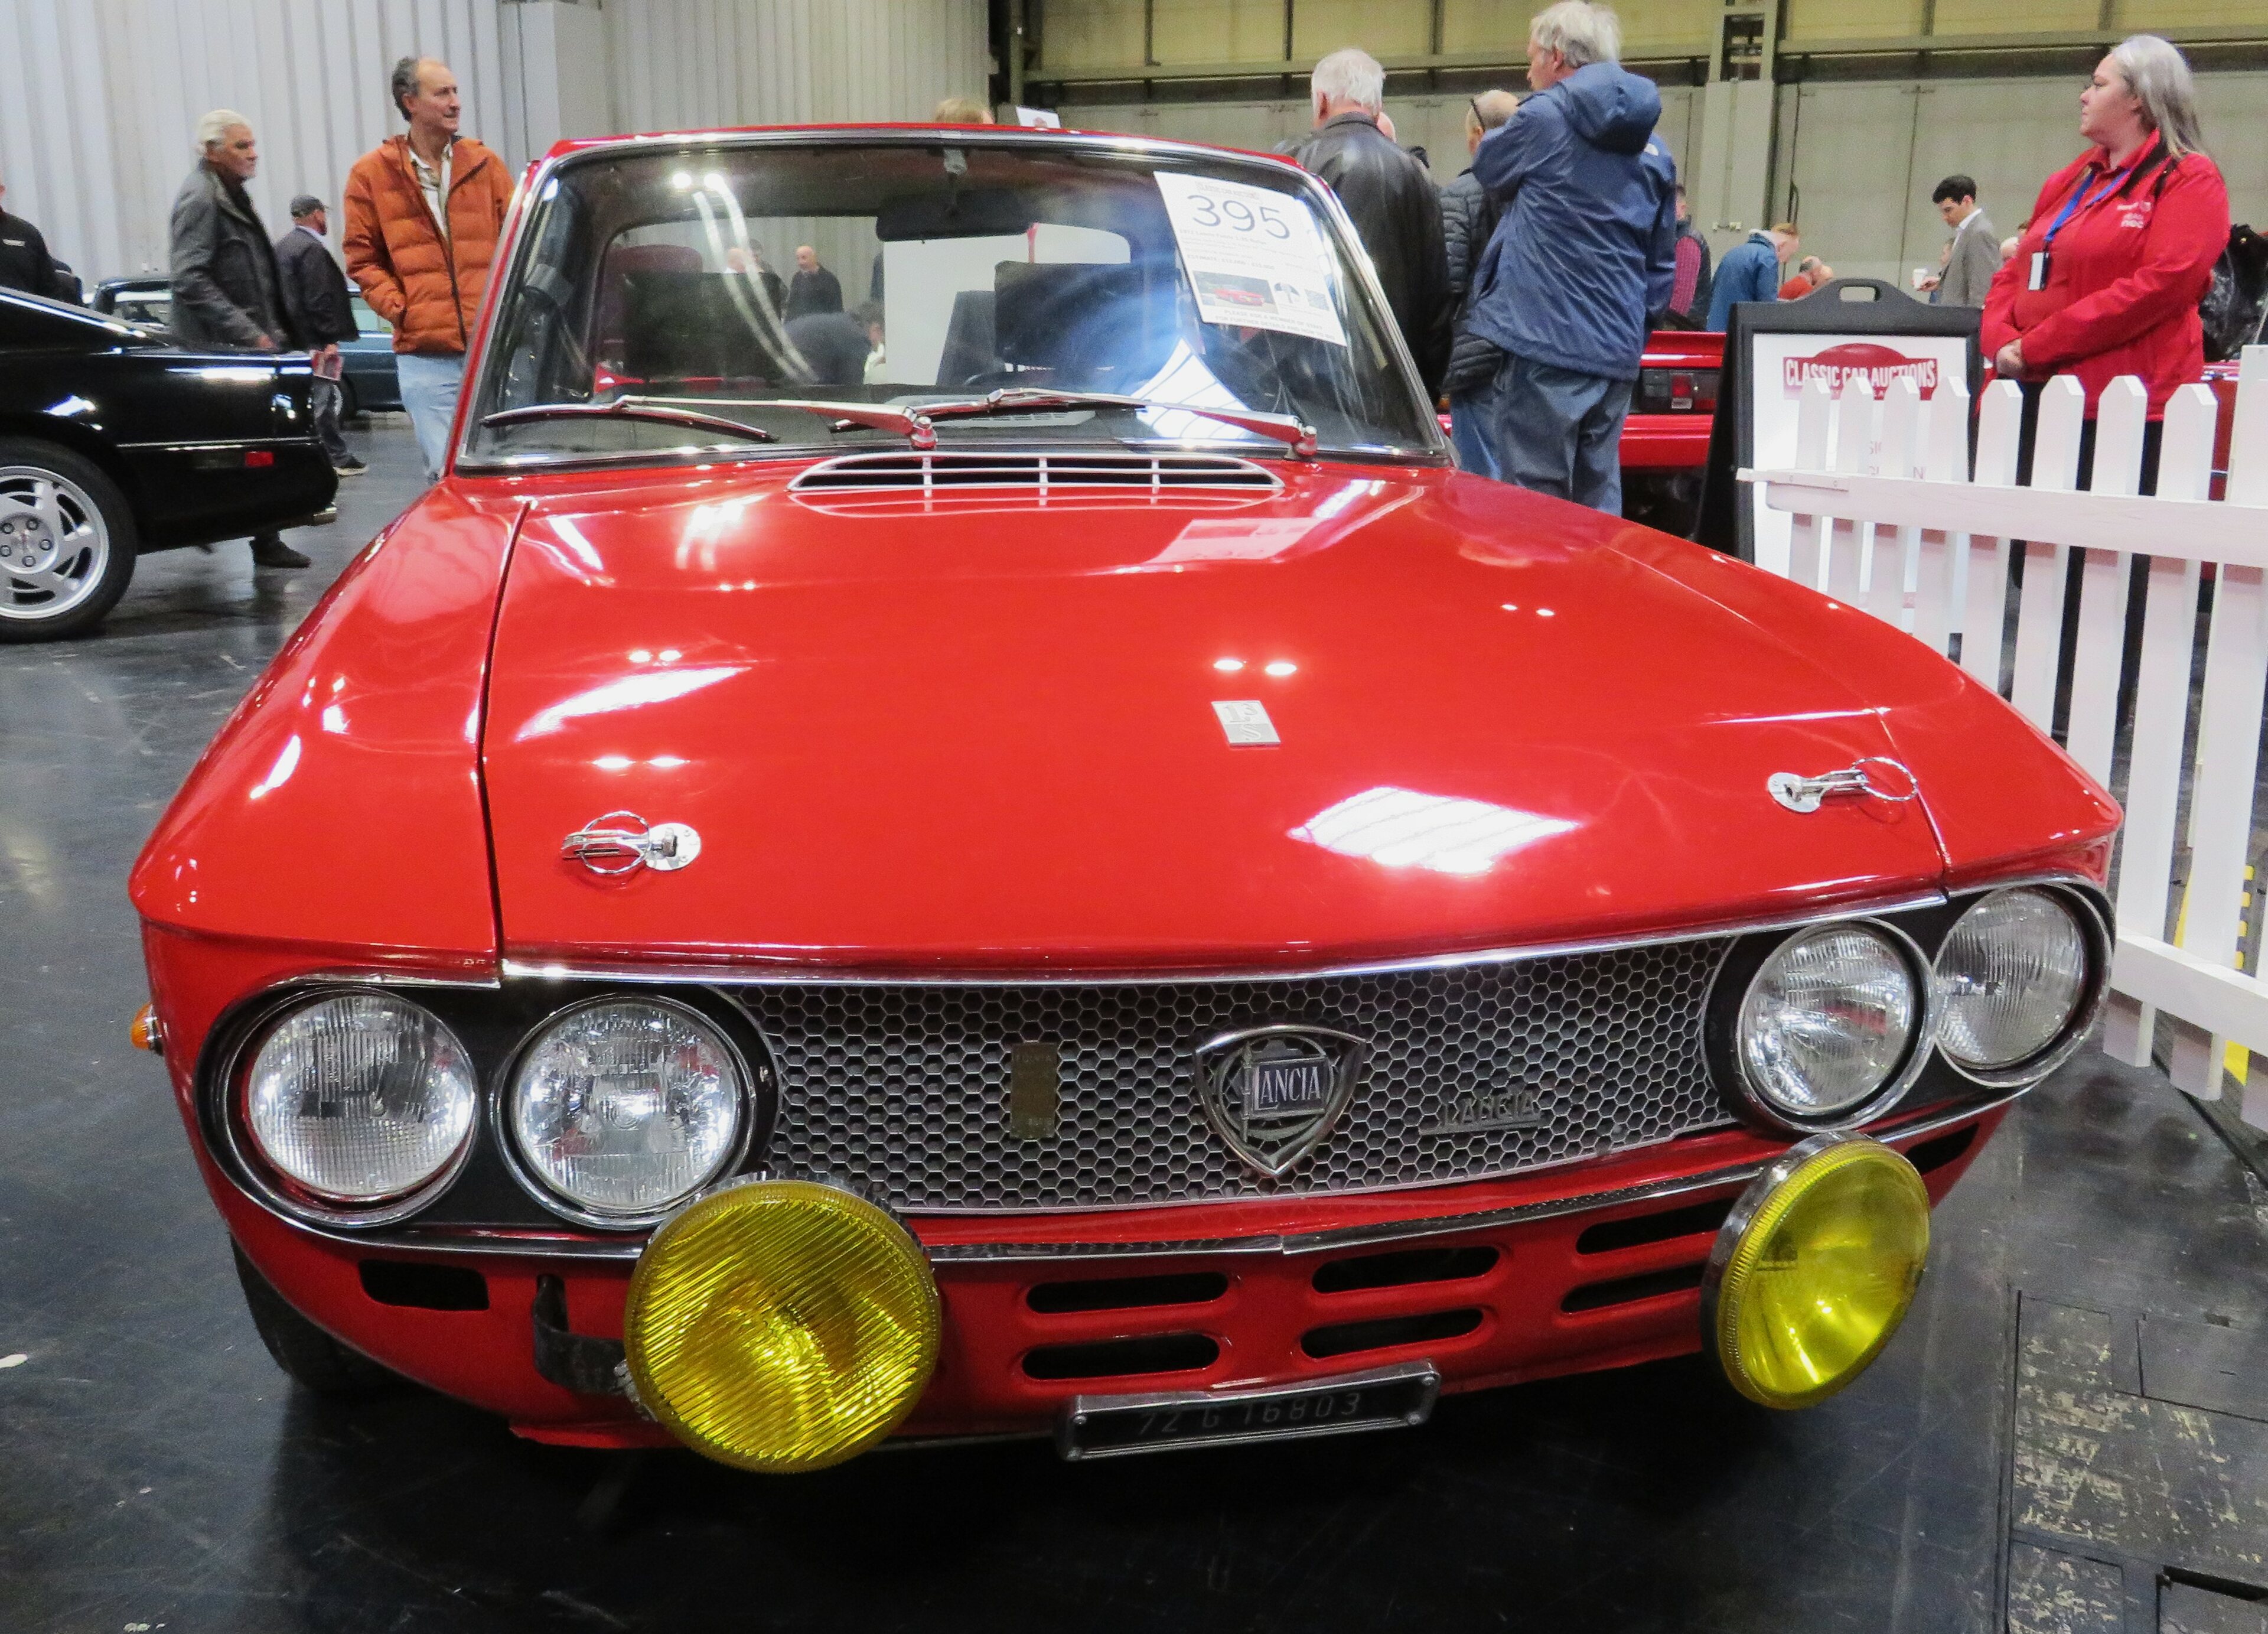 Lancia Fulvia 1.6 HF - Page 5 - Readers' Cars - PistonHeads UK - The image showcases a vibrant red classic car parked in an indoor setting, likely a garage or exhibition area. The car is characterized by its yellow headlights and is adorned with number plates on the front and rear. Its design suggests it might be from the 1970s or a similar era. In the background, there are several other vehicles, including cars and trucks, indicating a collector's or enthusiast's garage. The overall ambiance of the image is nostalgic and filled with automotive charm.